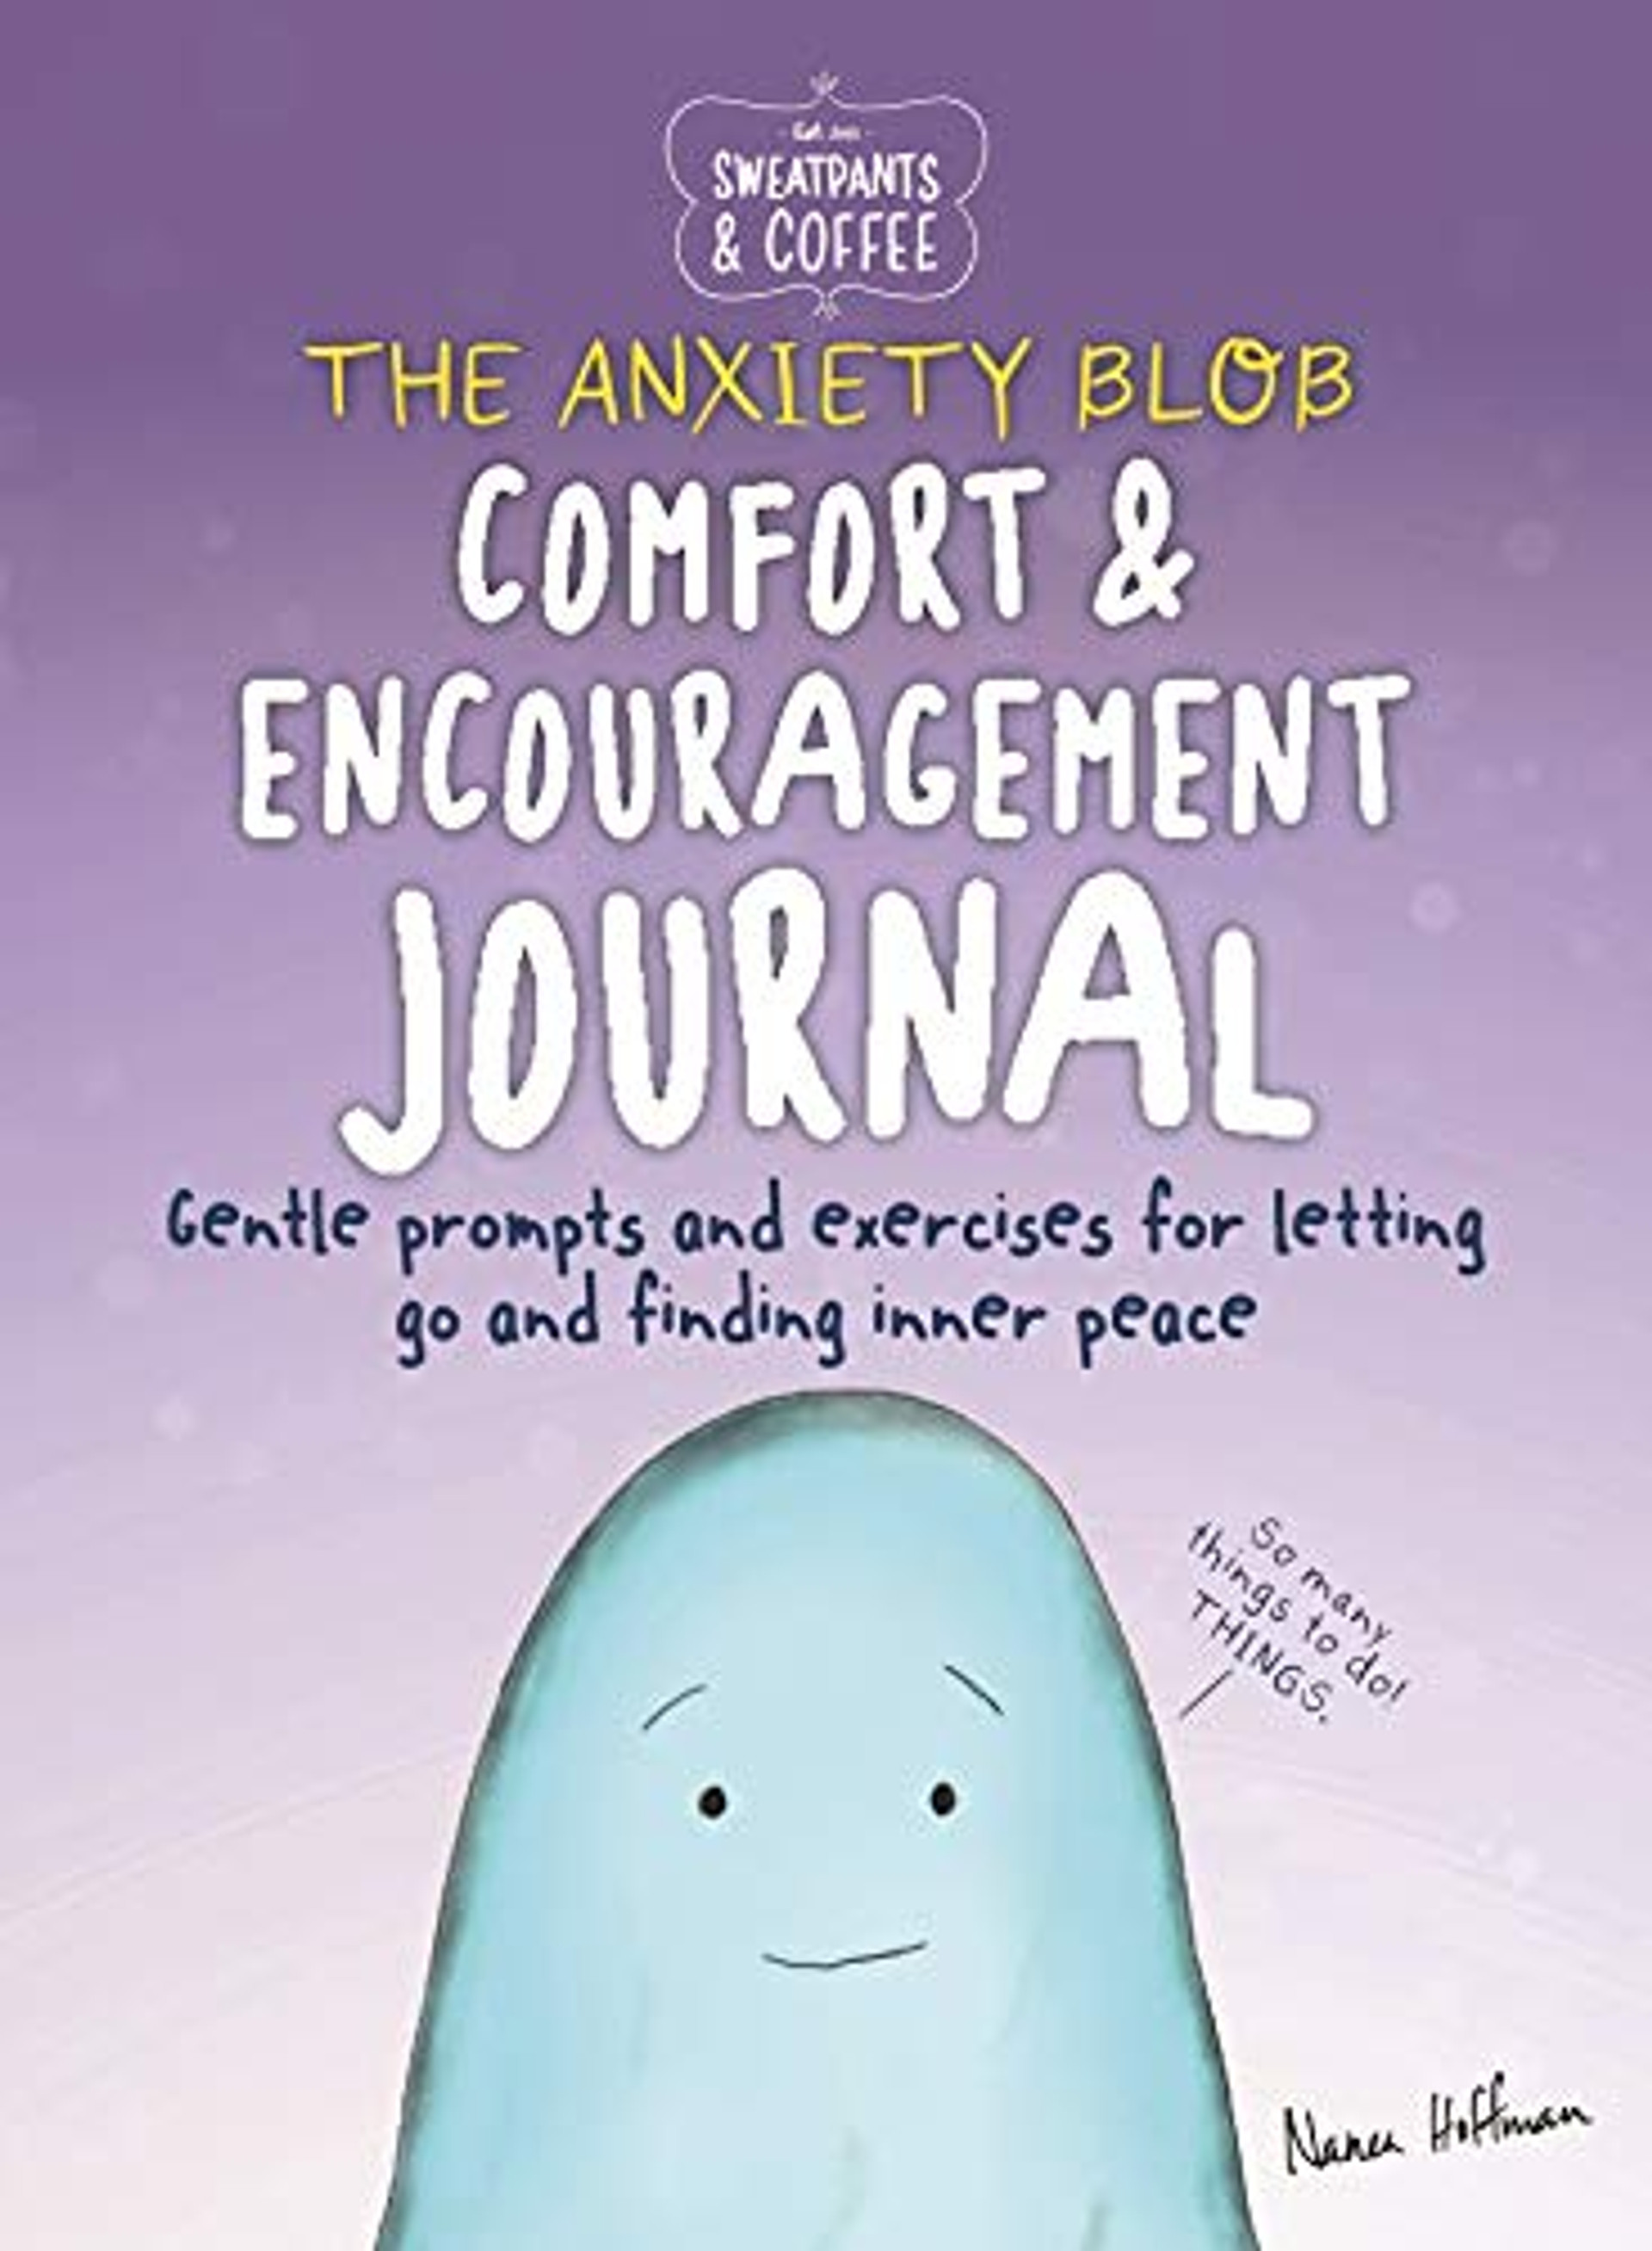 Sweatpants & Coffee: The Anxiety Blob Comfort and Encouragement Journal ...